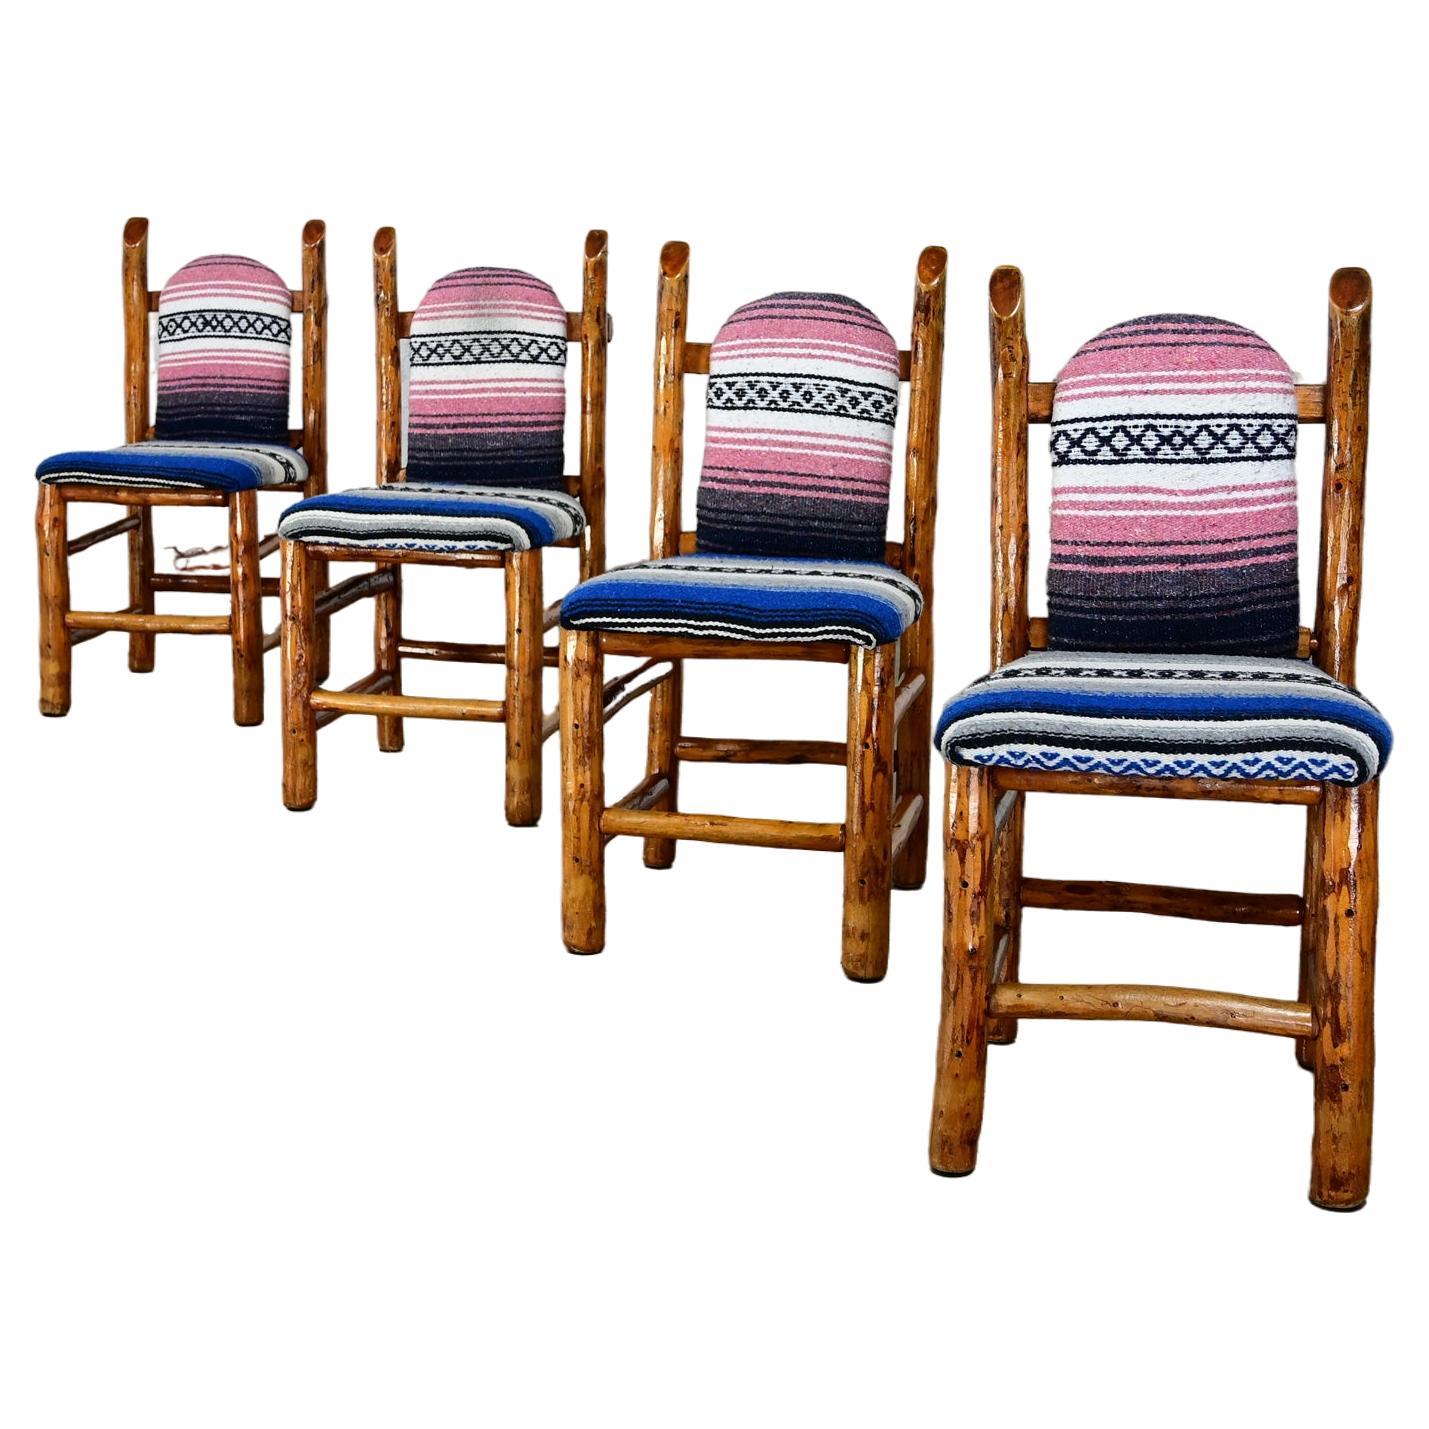 Rustic Natural Log Frame Dining Chairs with Traditional Serape Blanket Upholster For Sale